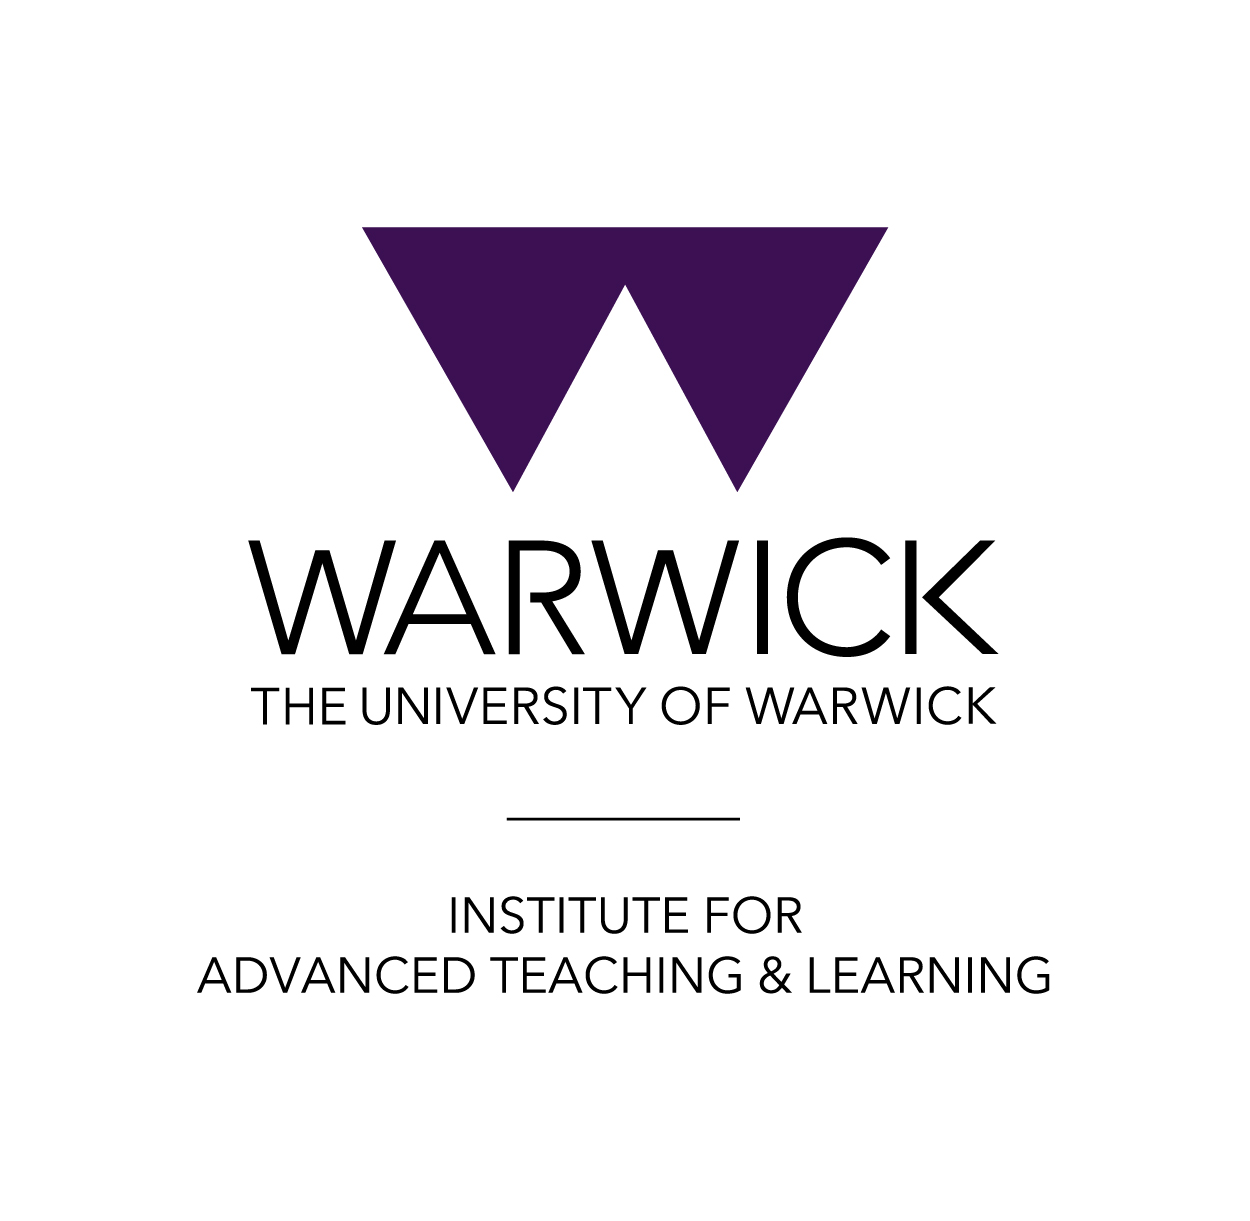 University of Warwick Institute for Advanced Teaching and Learning Aubergine Logo